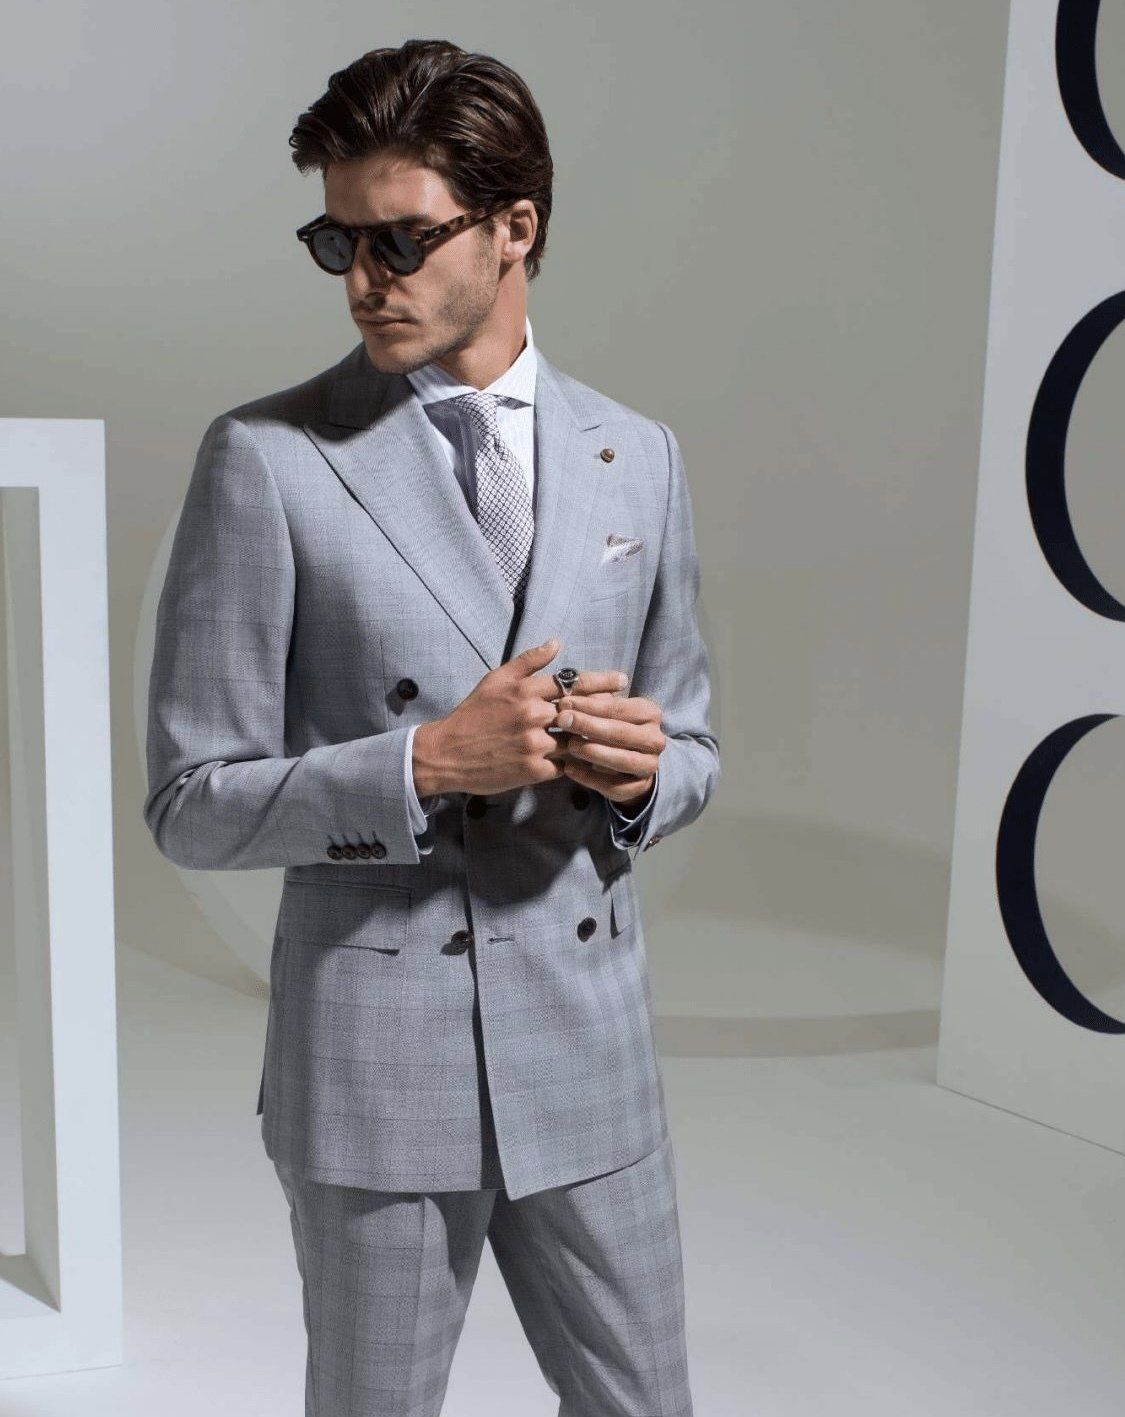 A man is wearing a grey suit and sunglasses